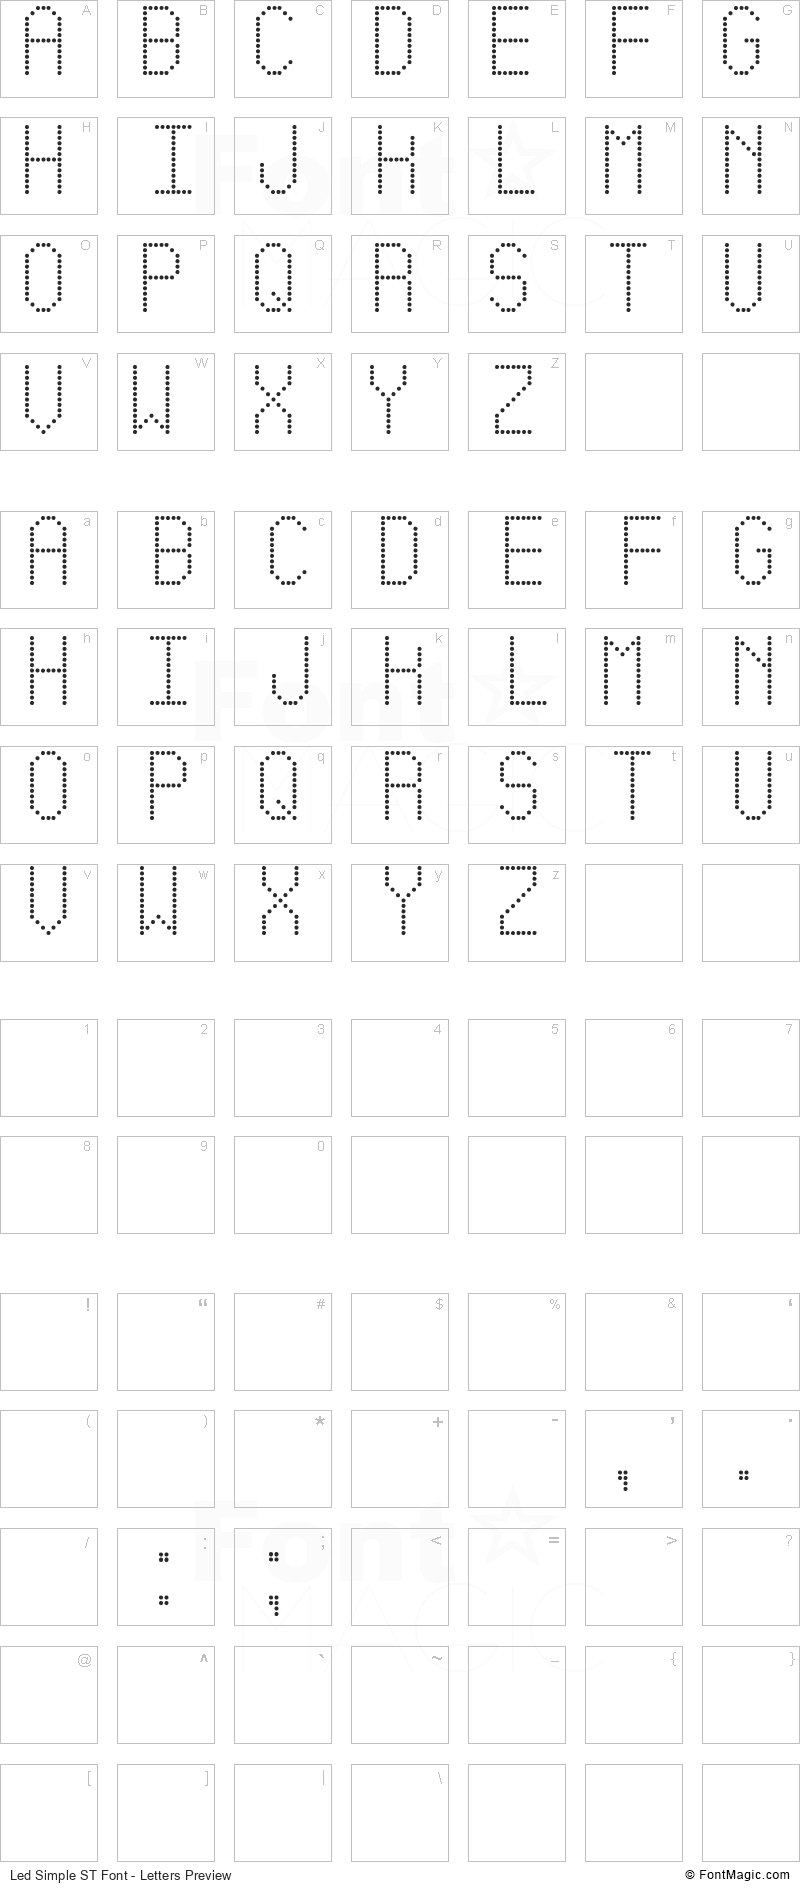 Led Simple ST Font - All Latters Preview Chart